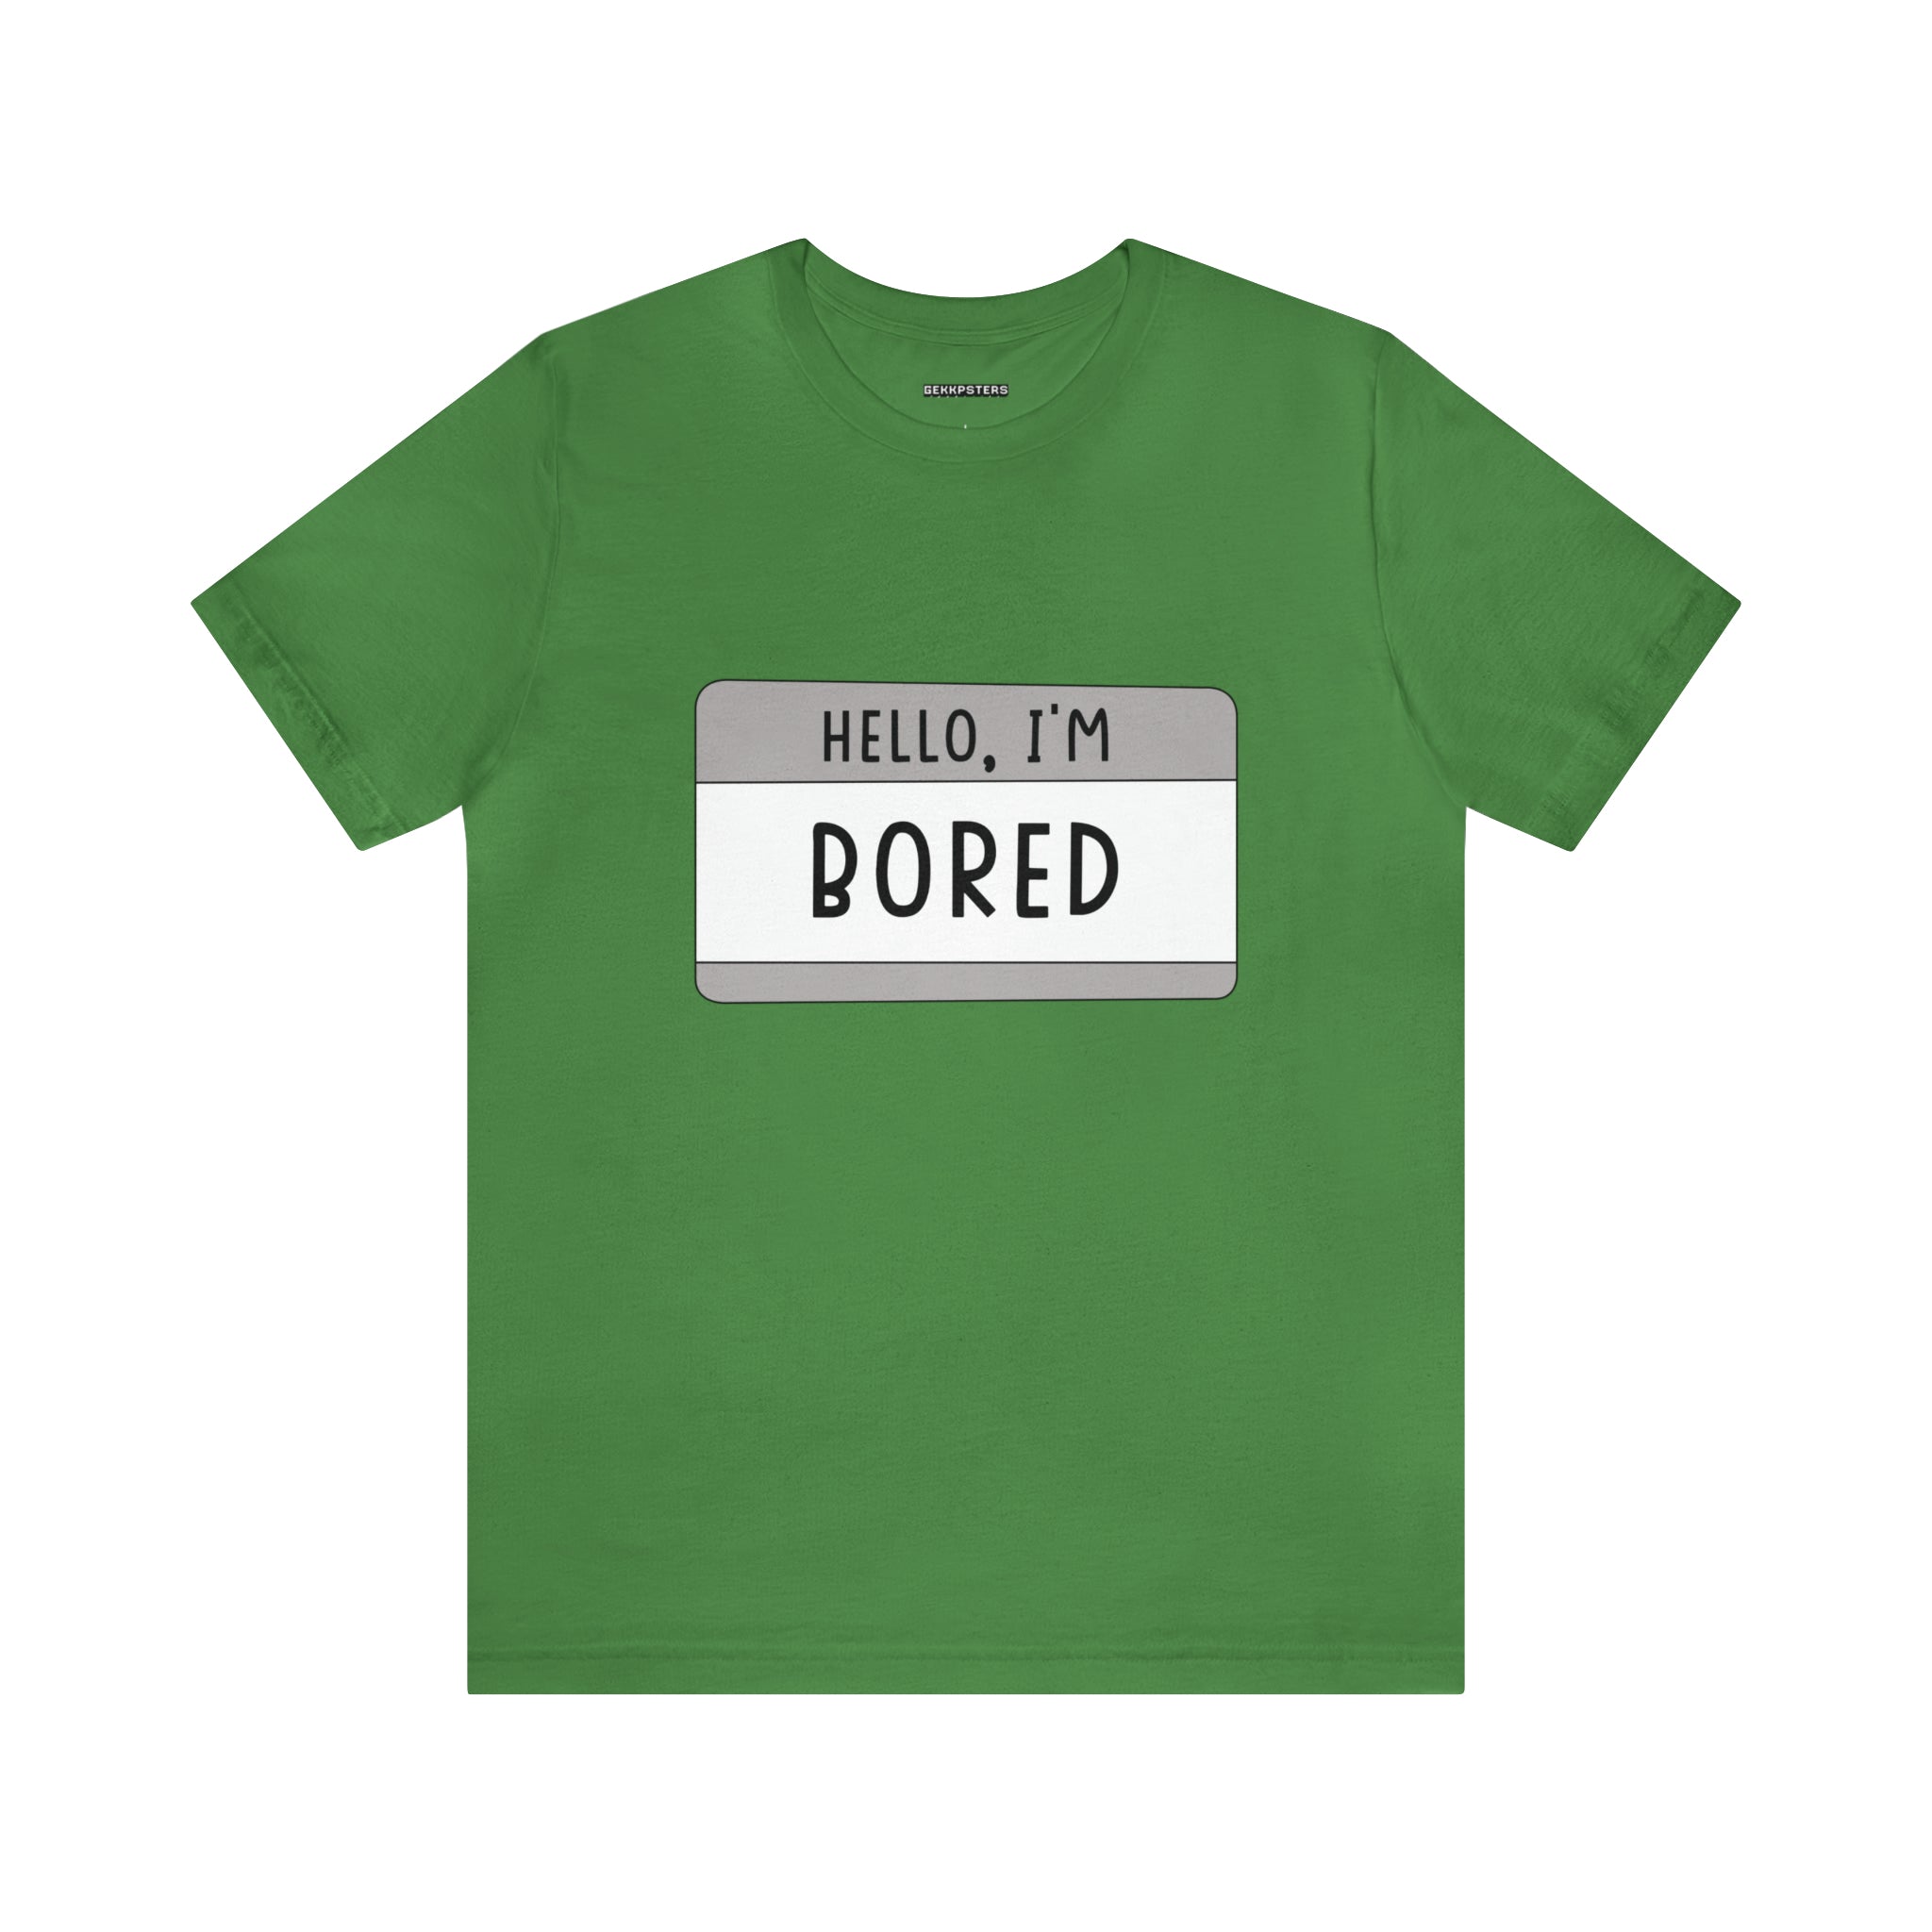 A green tee-shirt with the words "Hello, I'm Board" written on it.